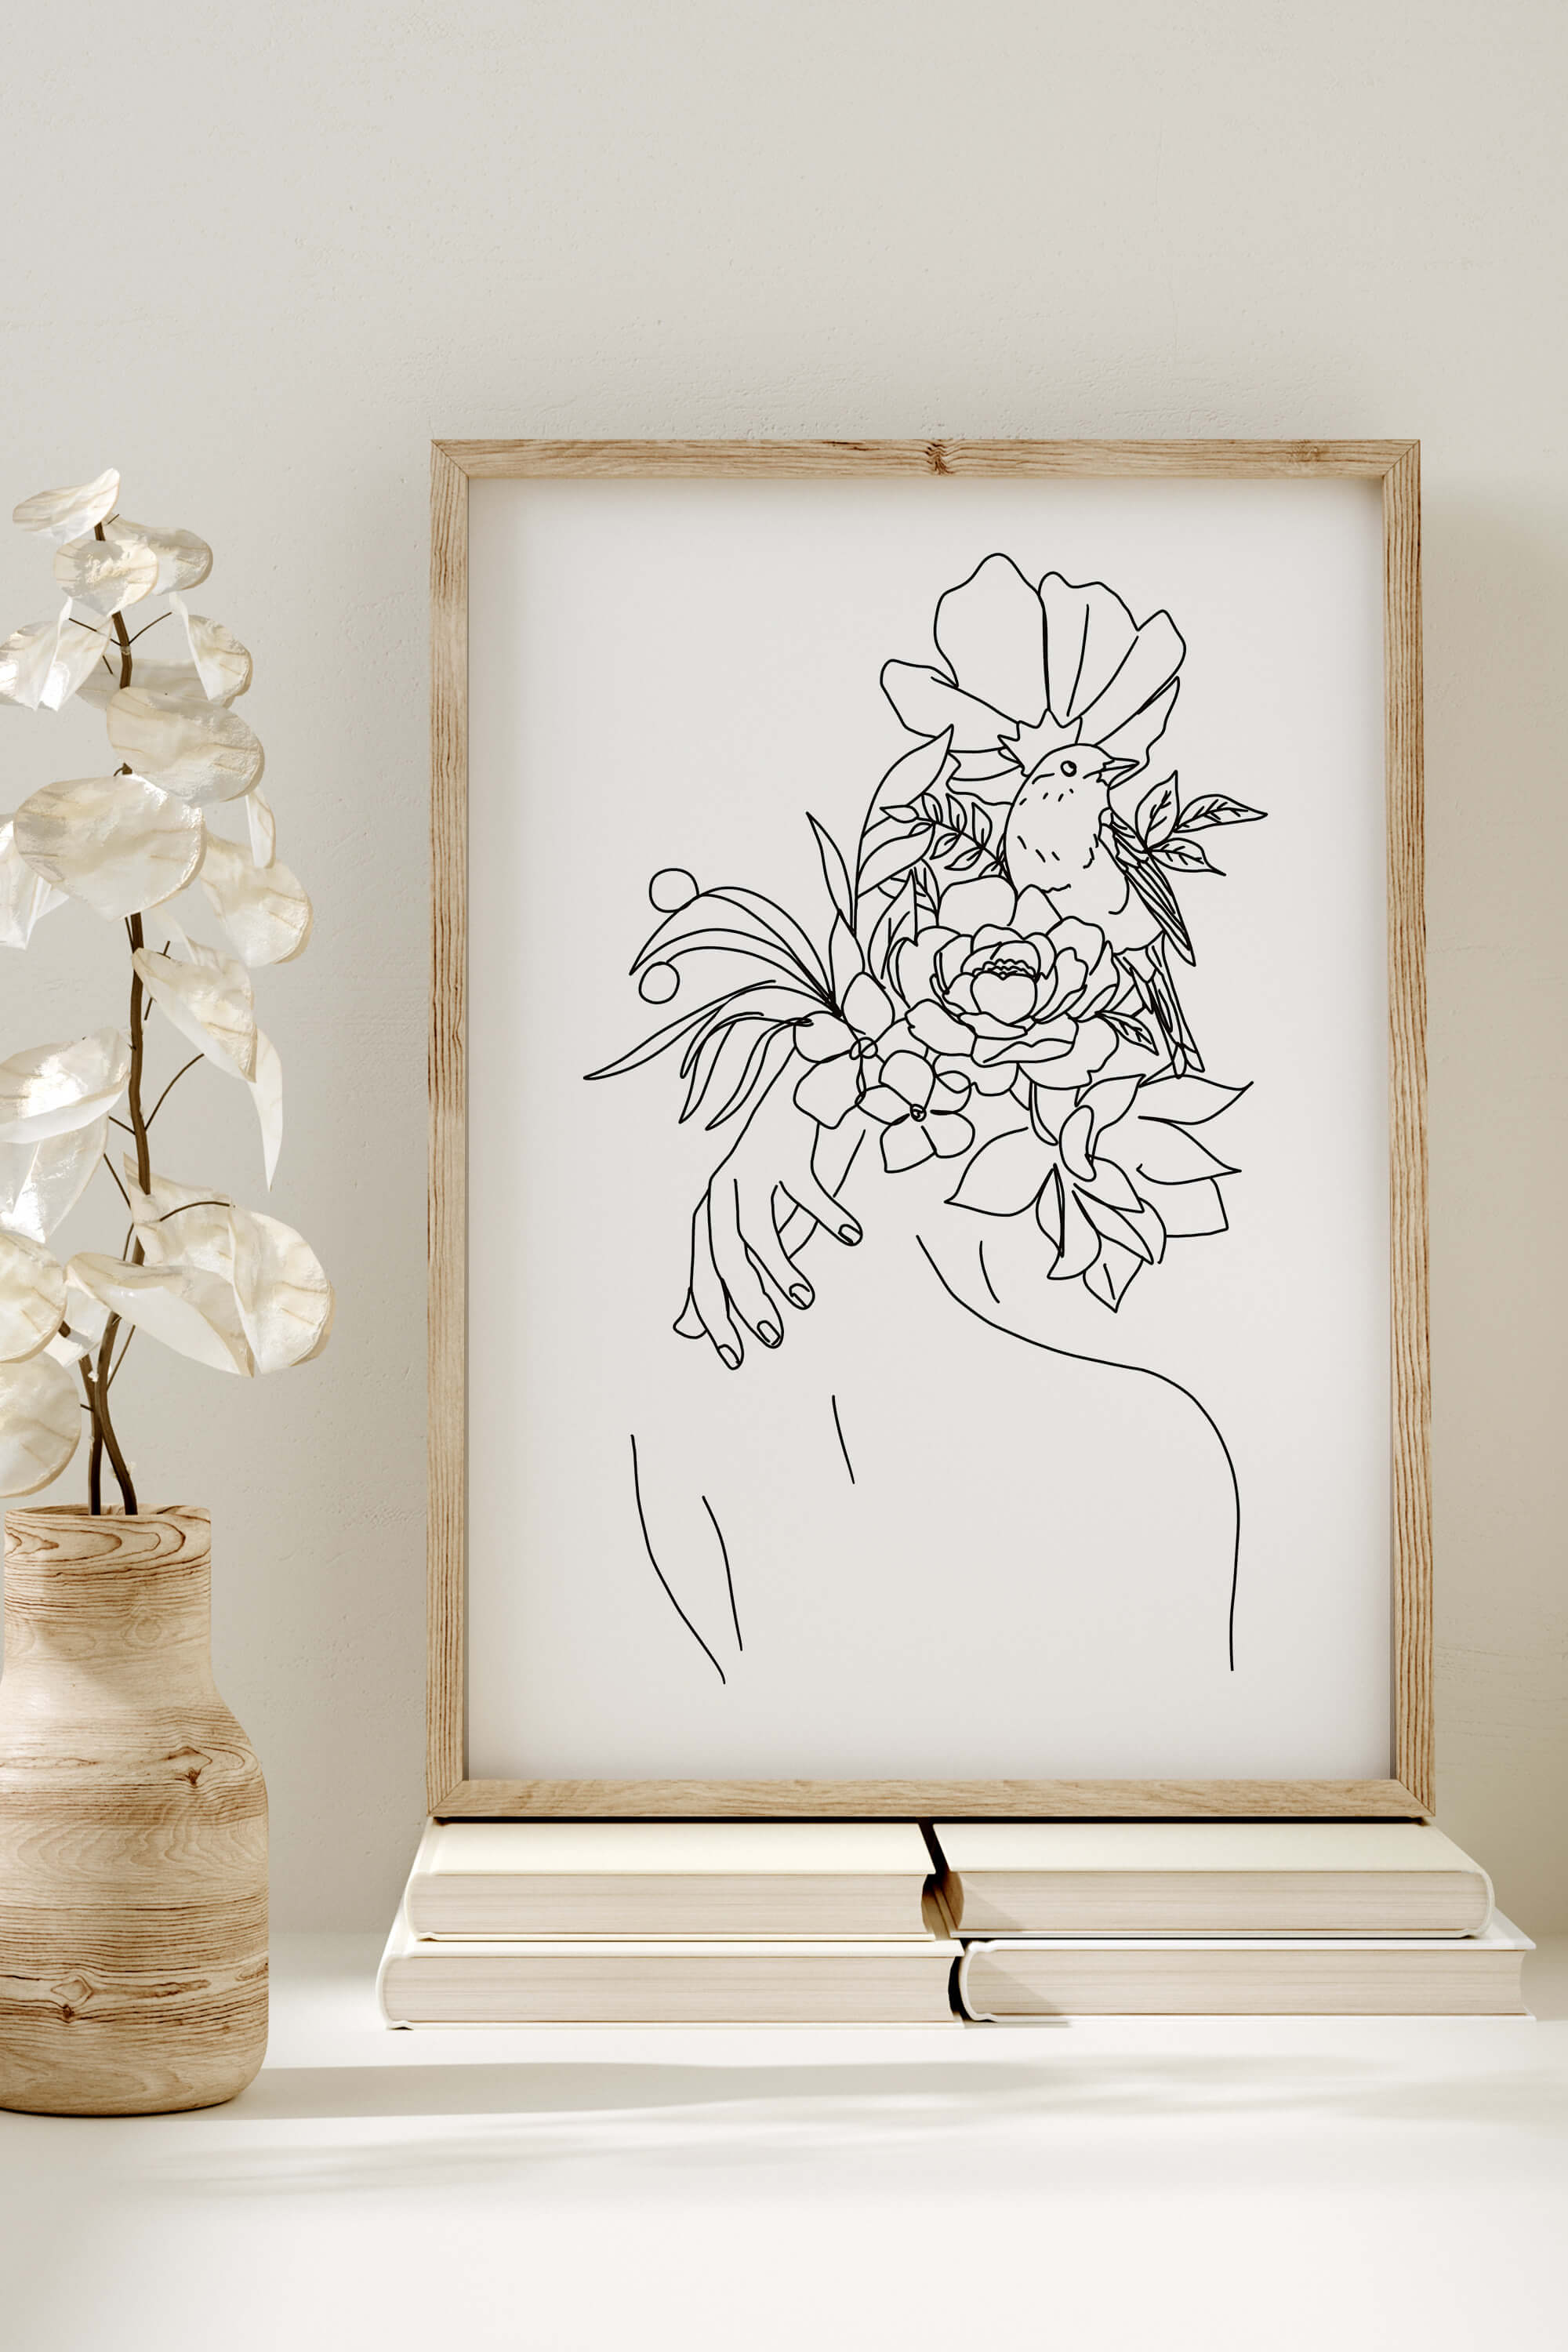 Elegant decor for modern living. This captivating line art print seamlessly merges delicate floral patterns with a modern aesthetic, creating a visual symphony that appeals to art aficionados and modern design enthusiasts.